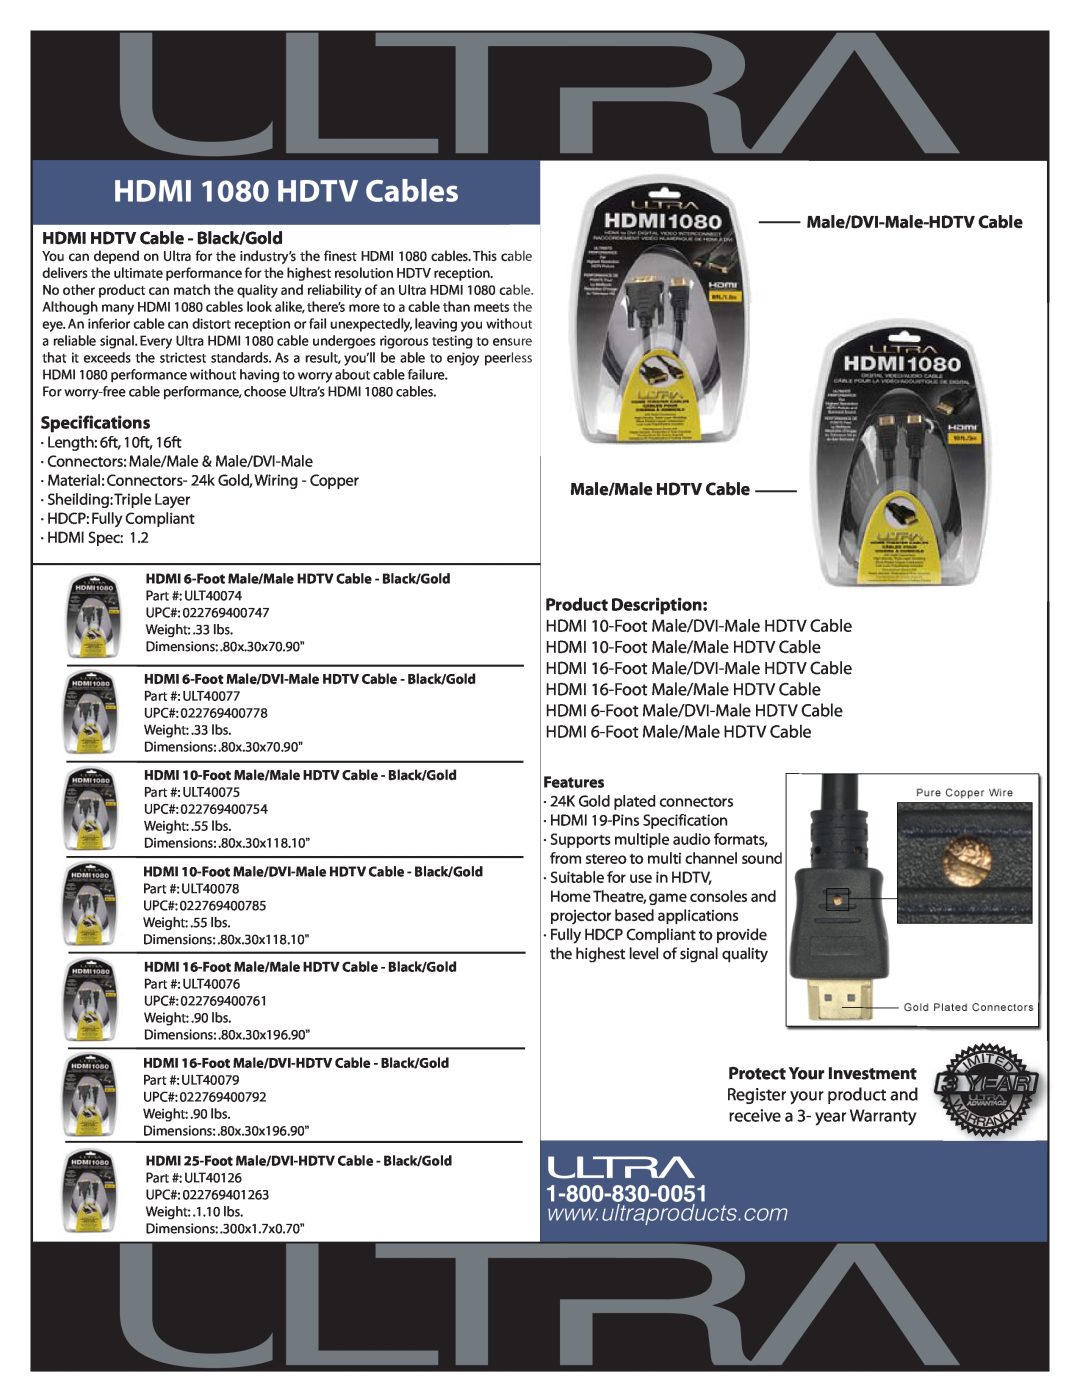 Ultra Products ULT40126 specifications HDMI 1080 HDTV Cables, Male/DVI-Male-HDTVCable, HDMI HDTV Cable - Black/Gold 